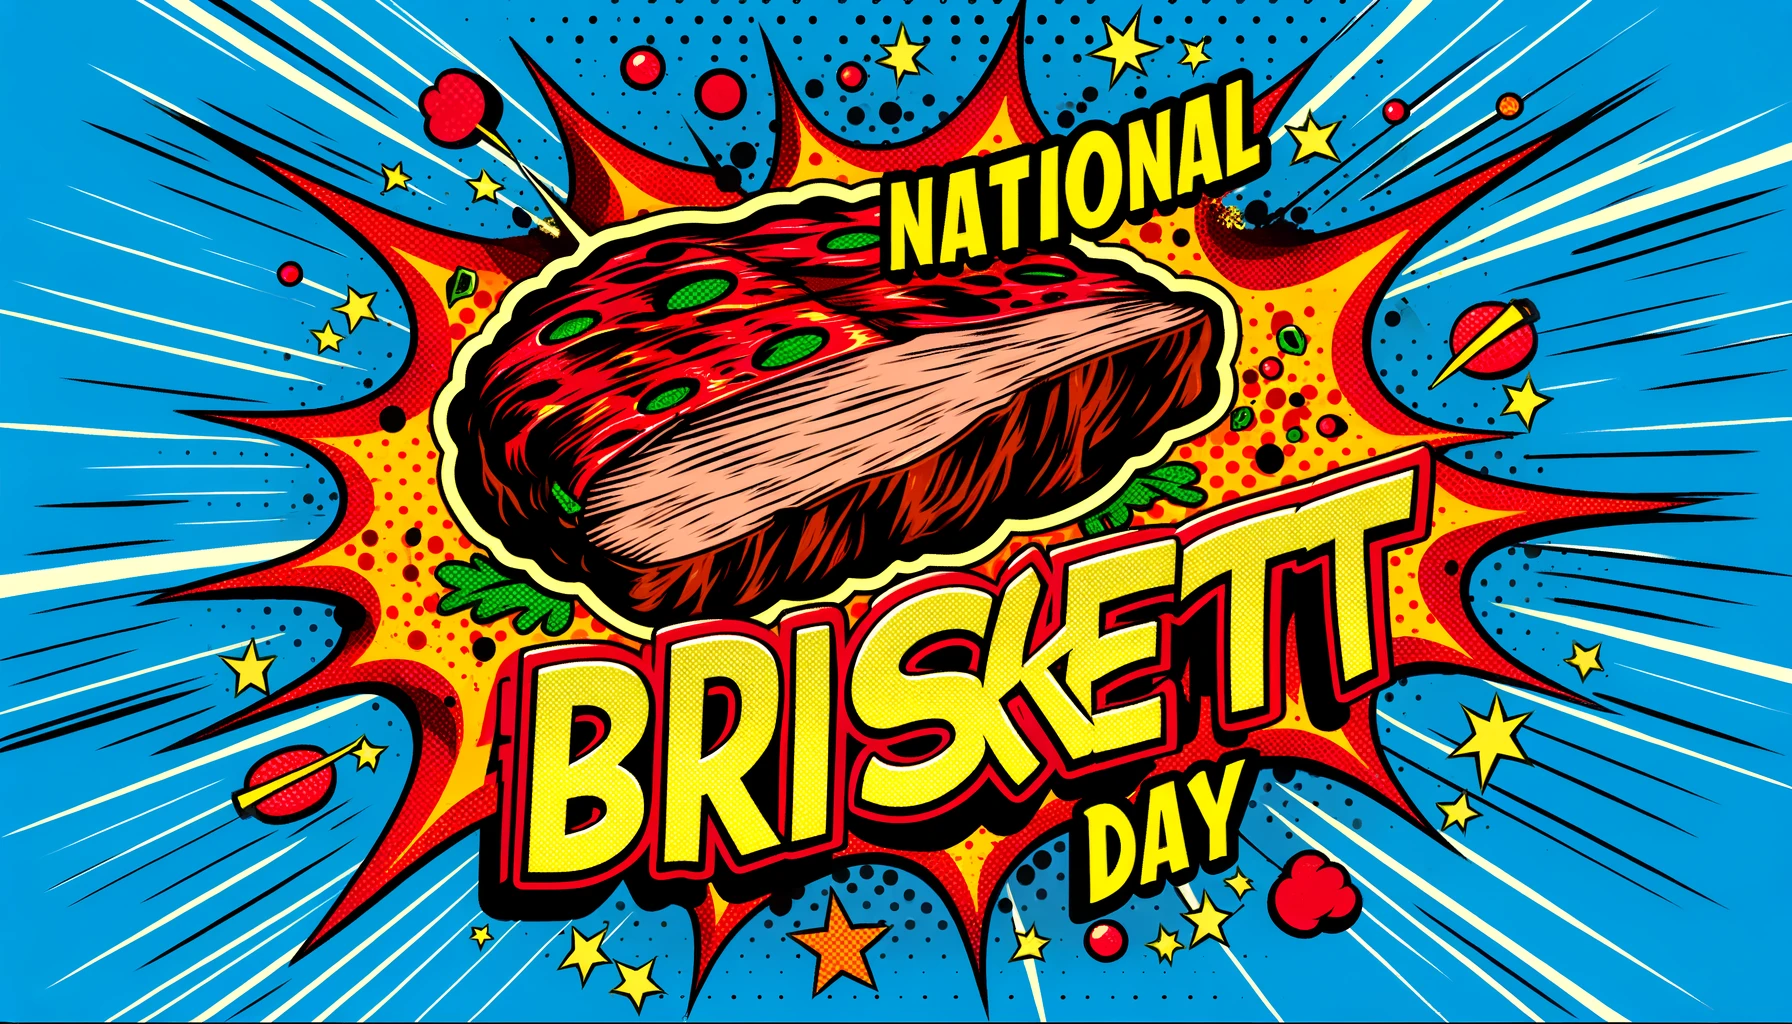 Delicious Brisket Day Greetings for Friends and Family